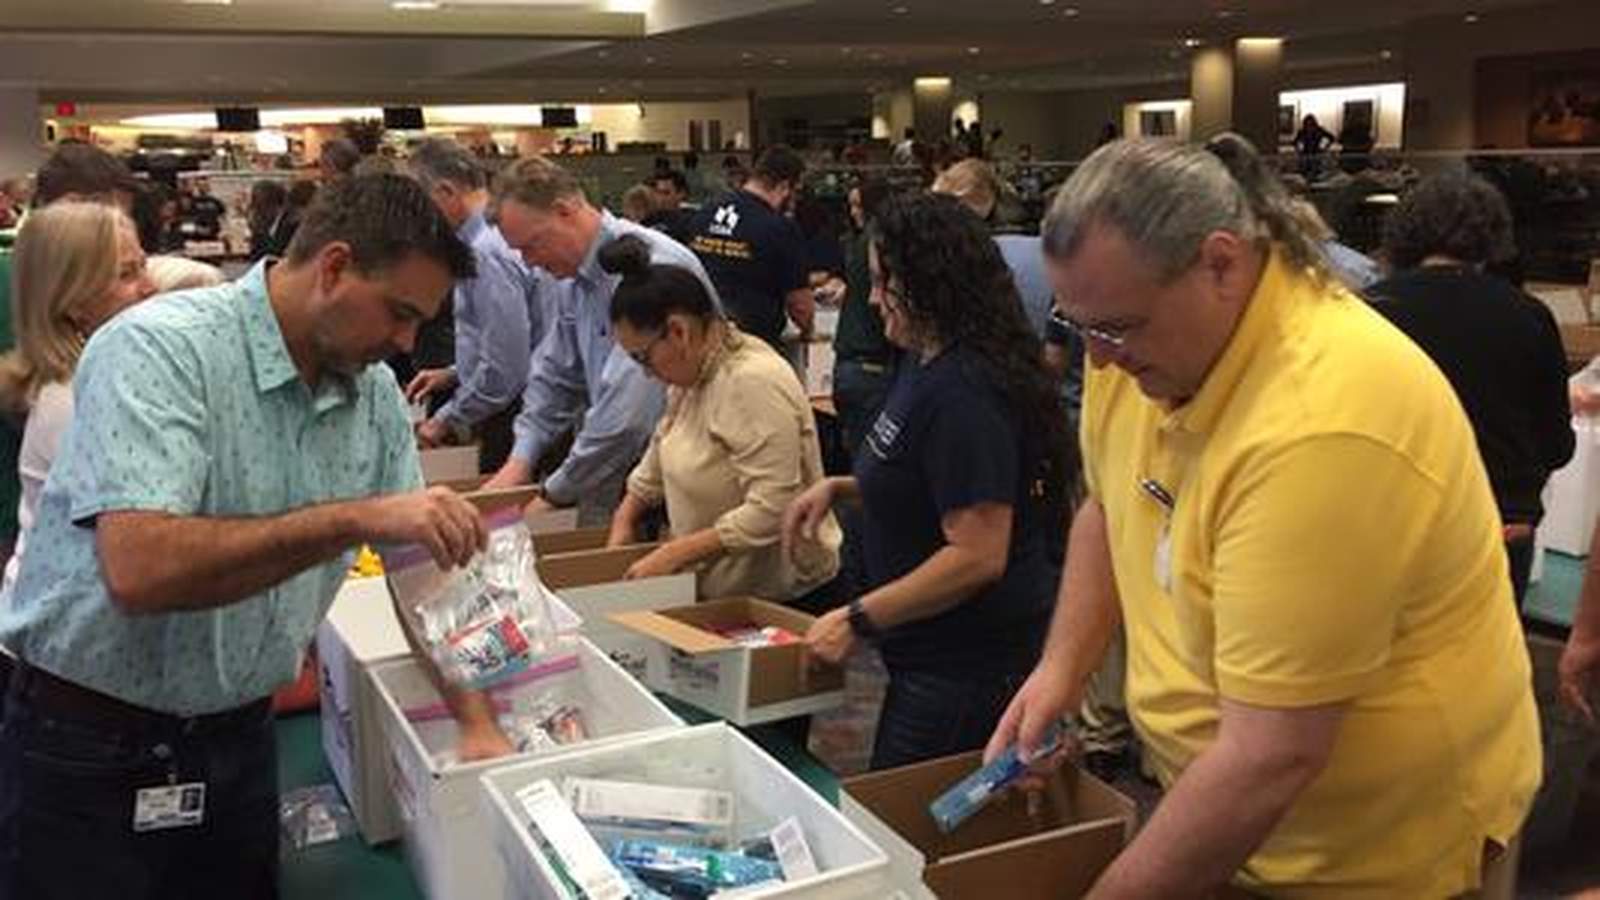 USAA employees help assemble care packages for deployed servicemen and women